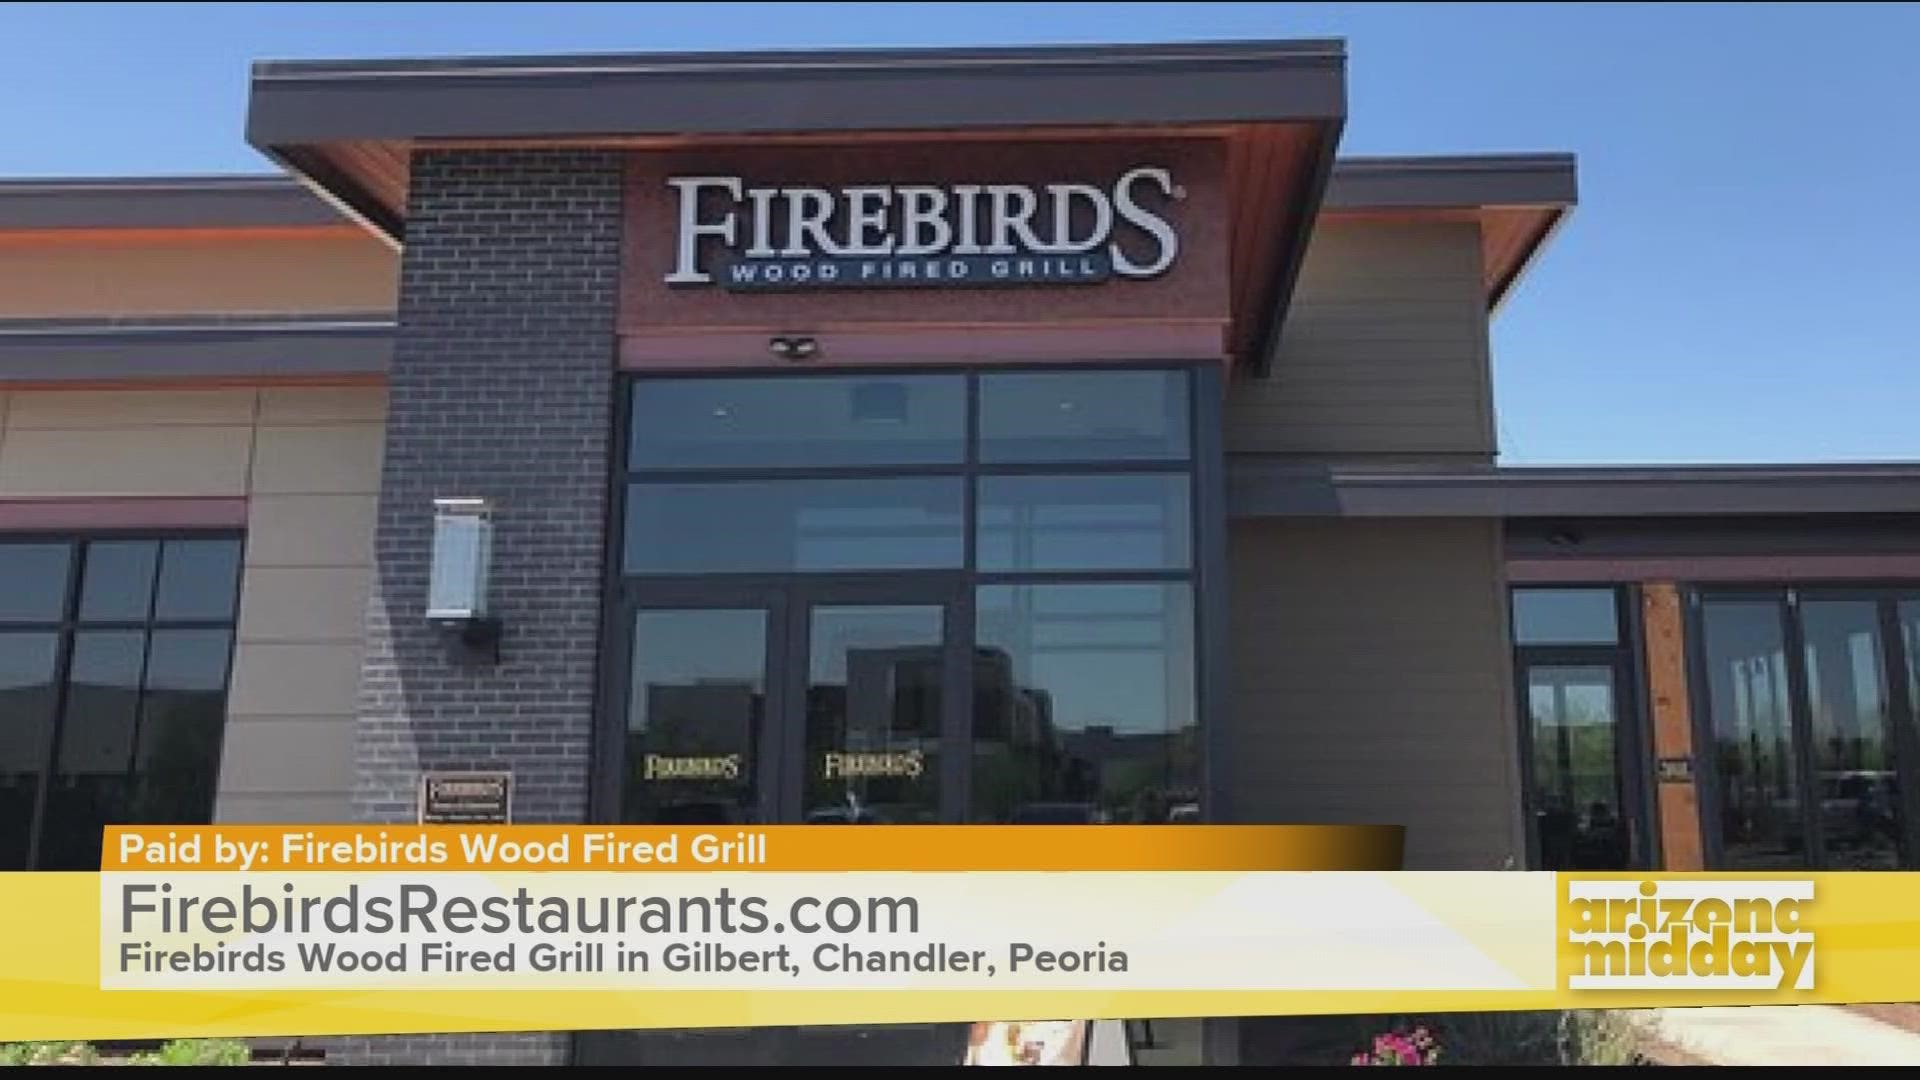 Chris LaMontagne shares some delicious eats and what makes Firebirds Wood Fired Grill special.